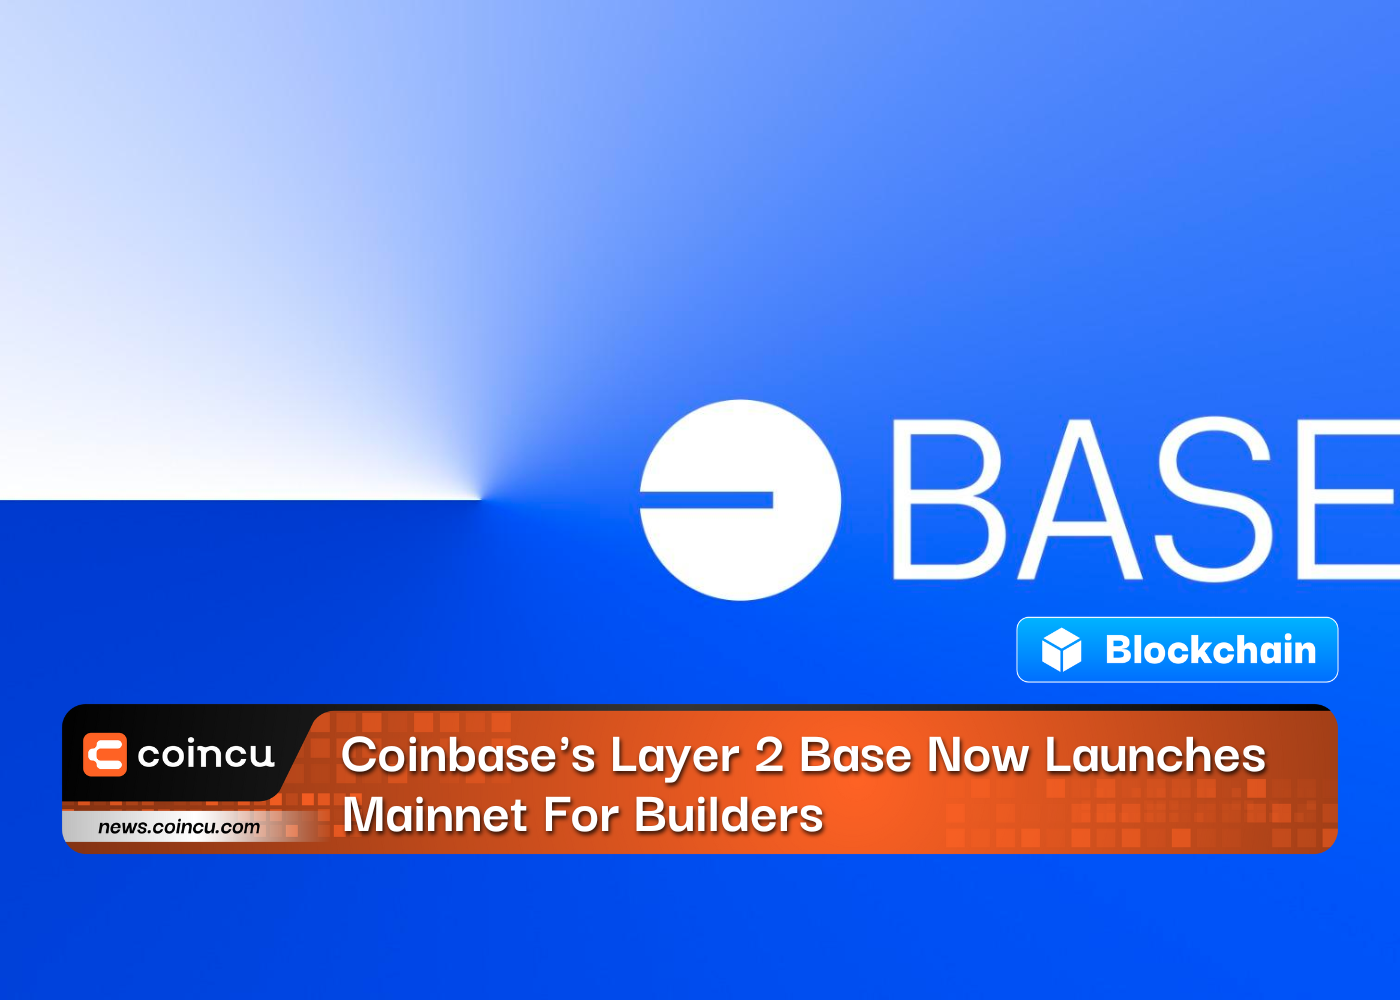 Coinbase’s Layer 2 Base Now Launches Mainnet For Builders